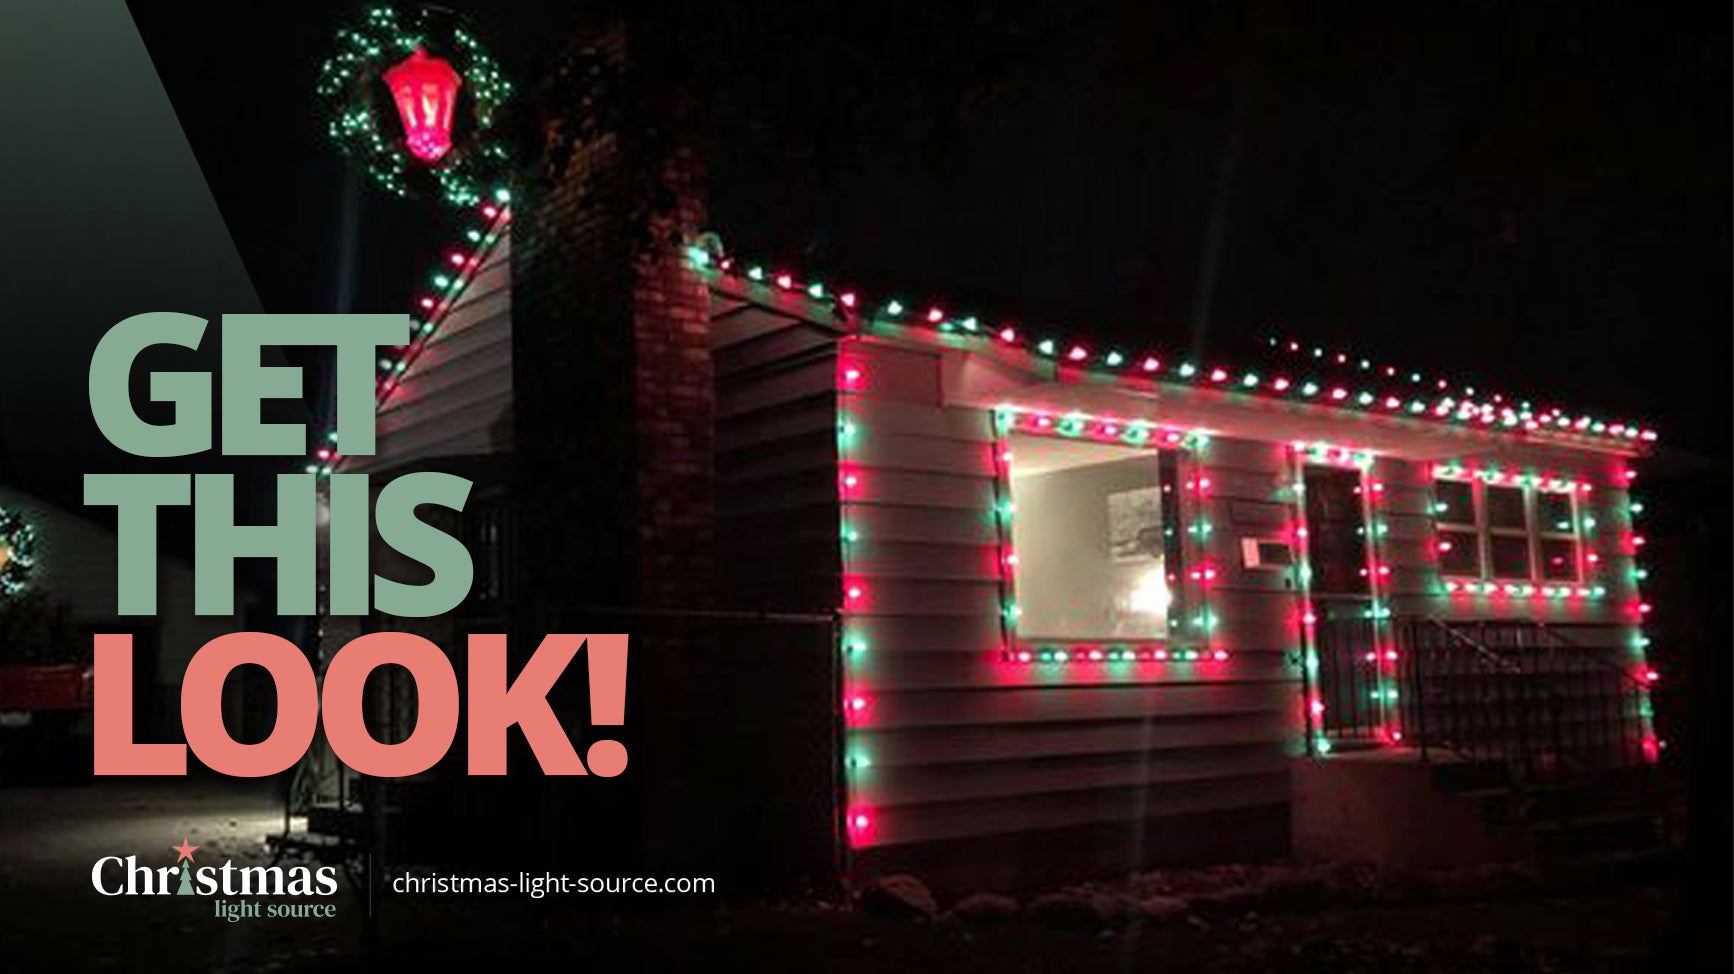 Get this Look! Retro red and green bulbs